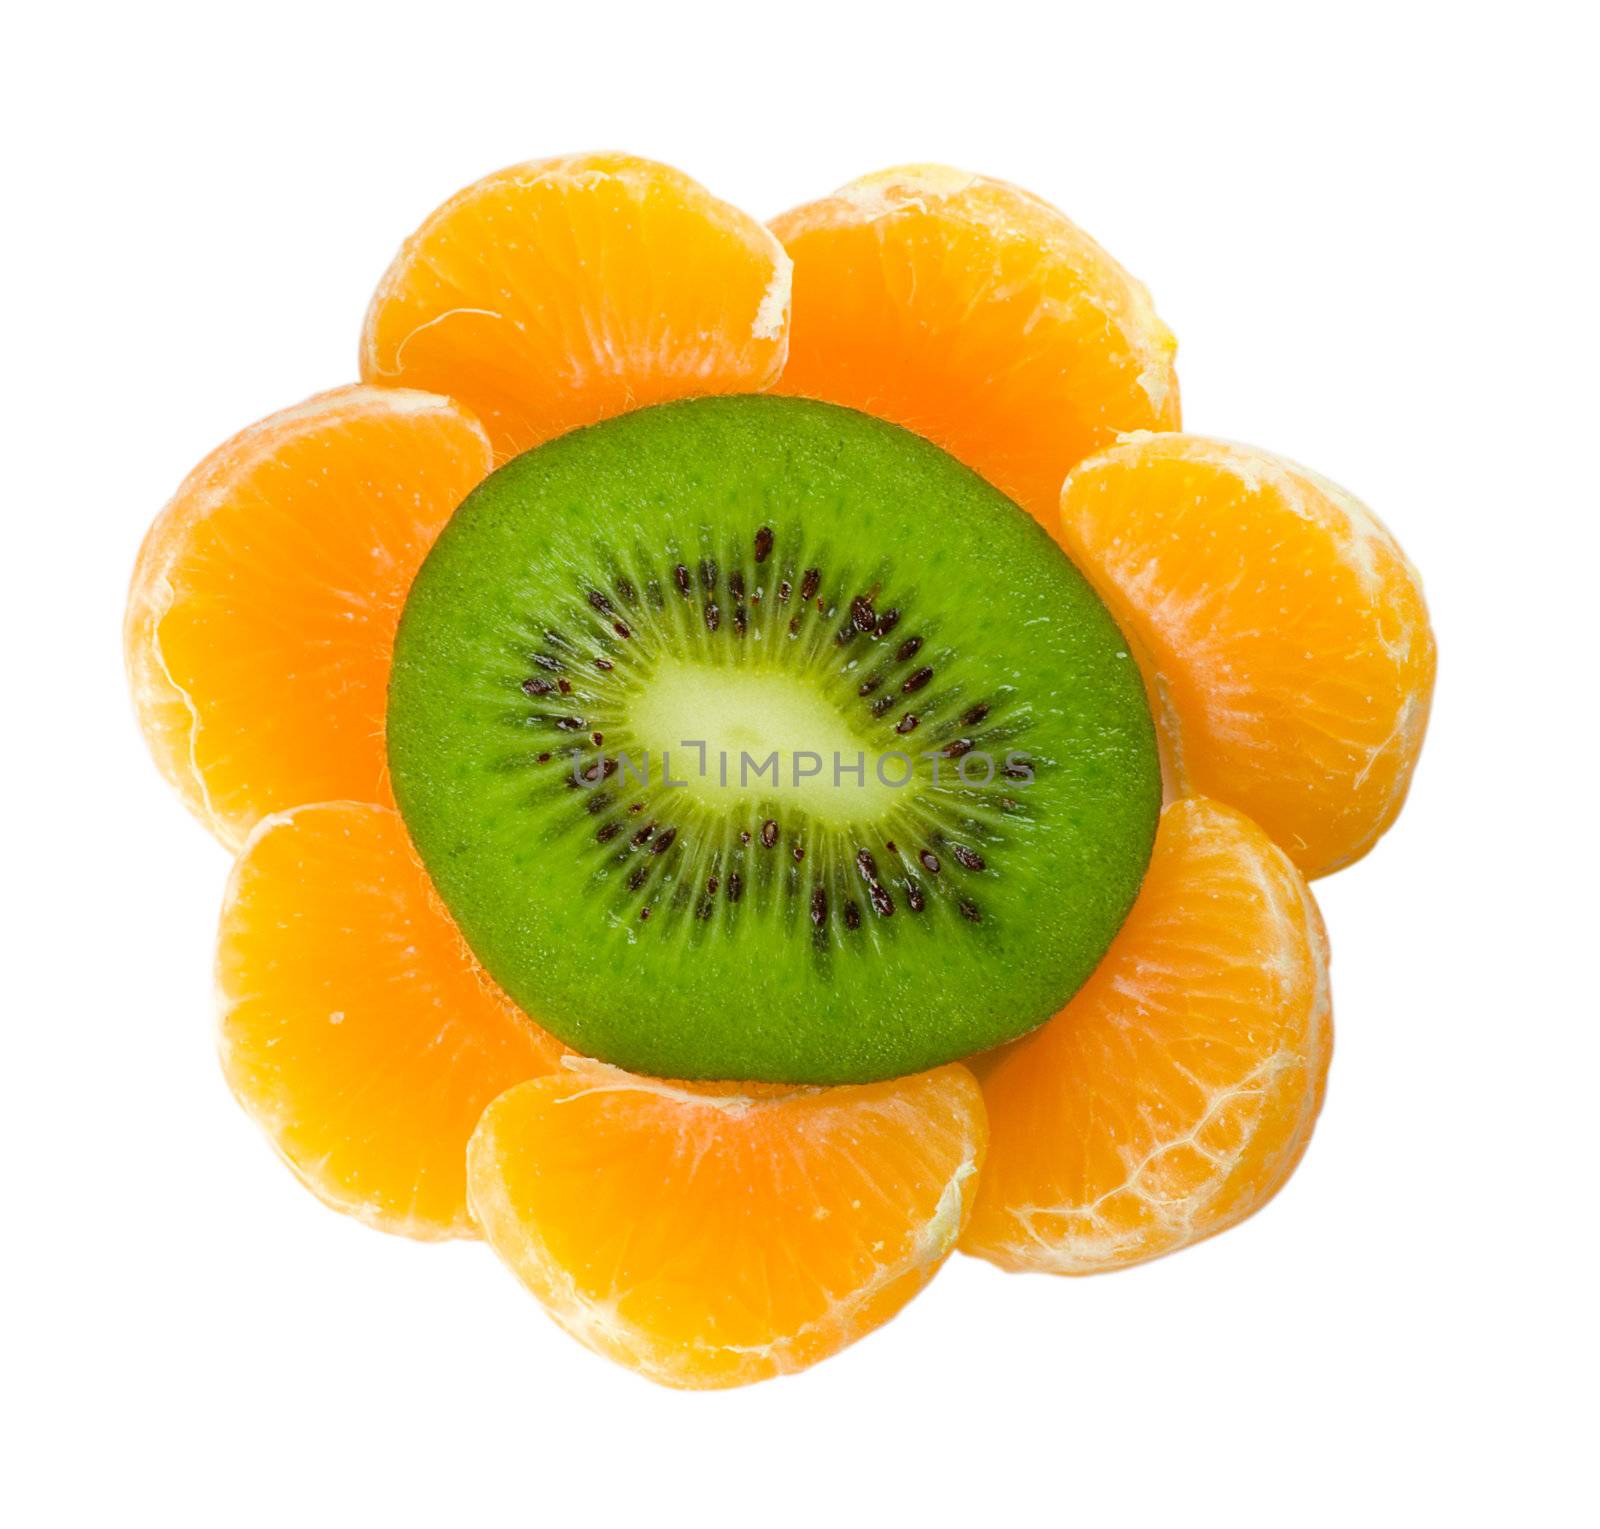 kiwi and tangerine as flower, isolated on white